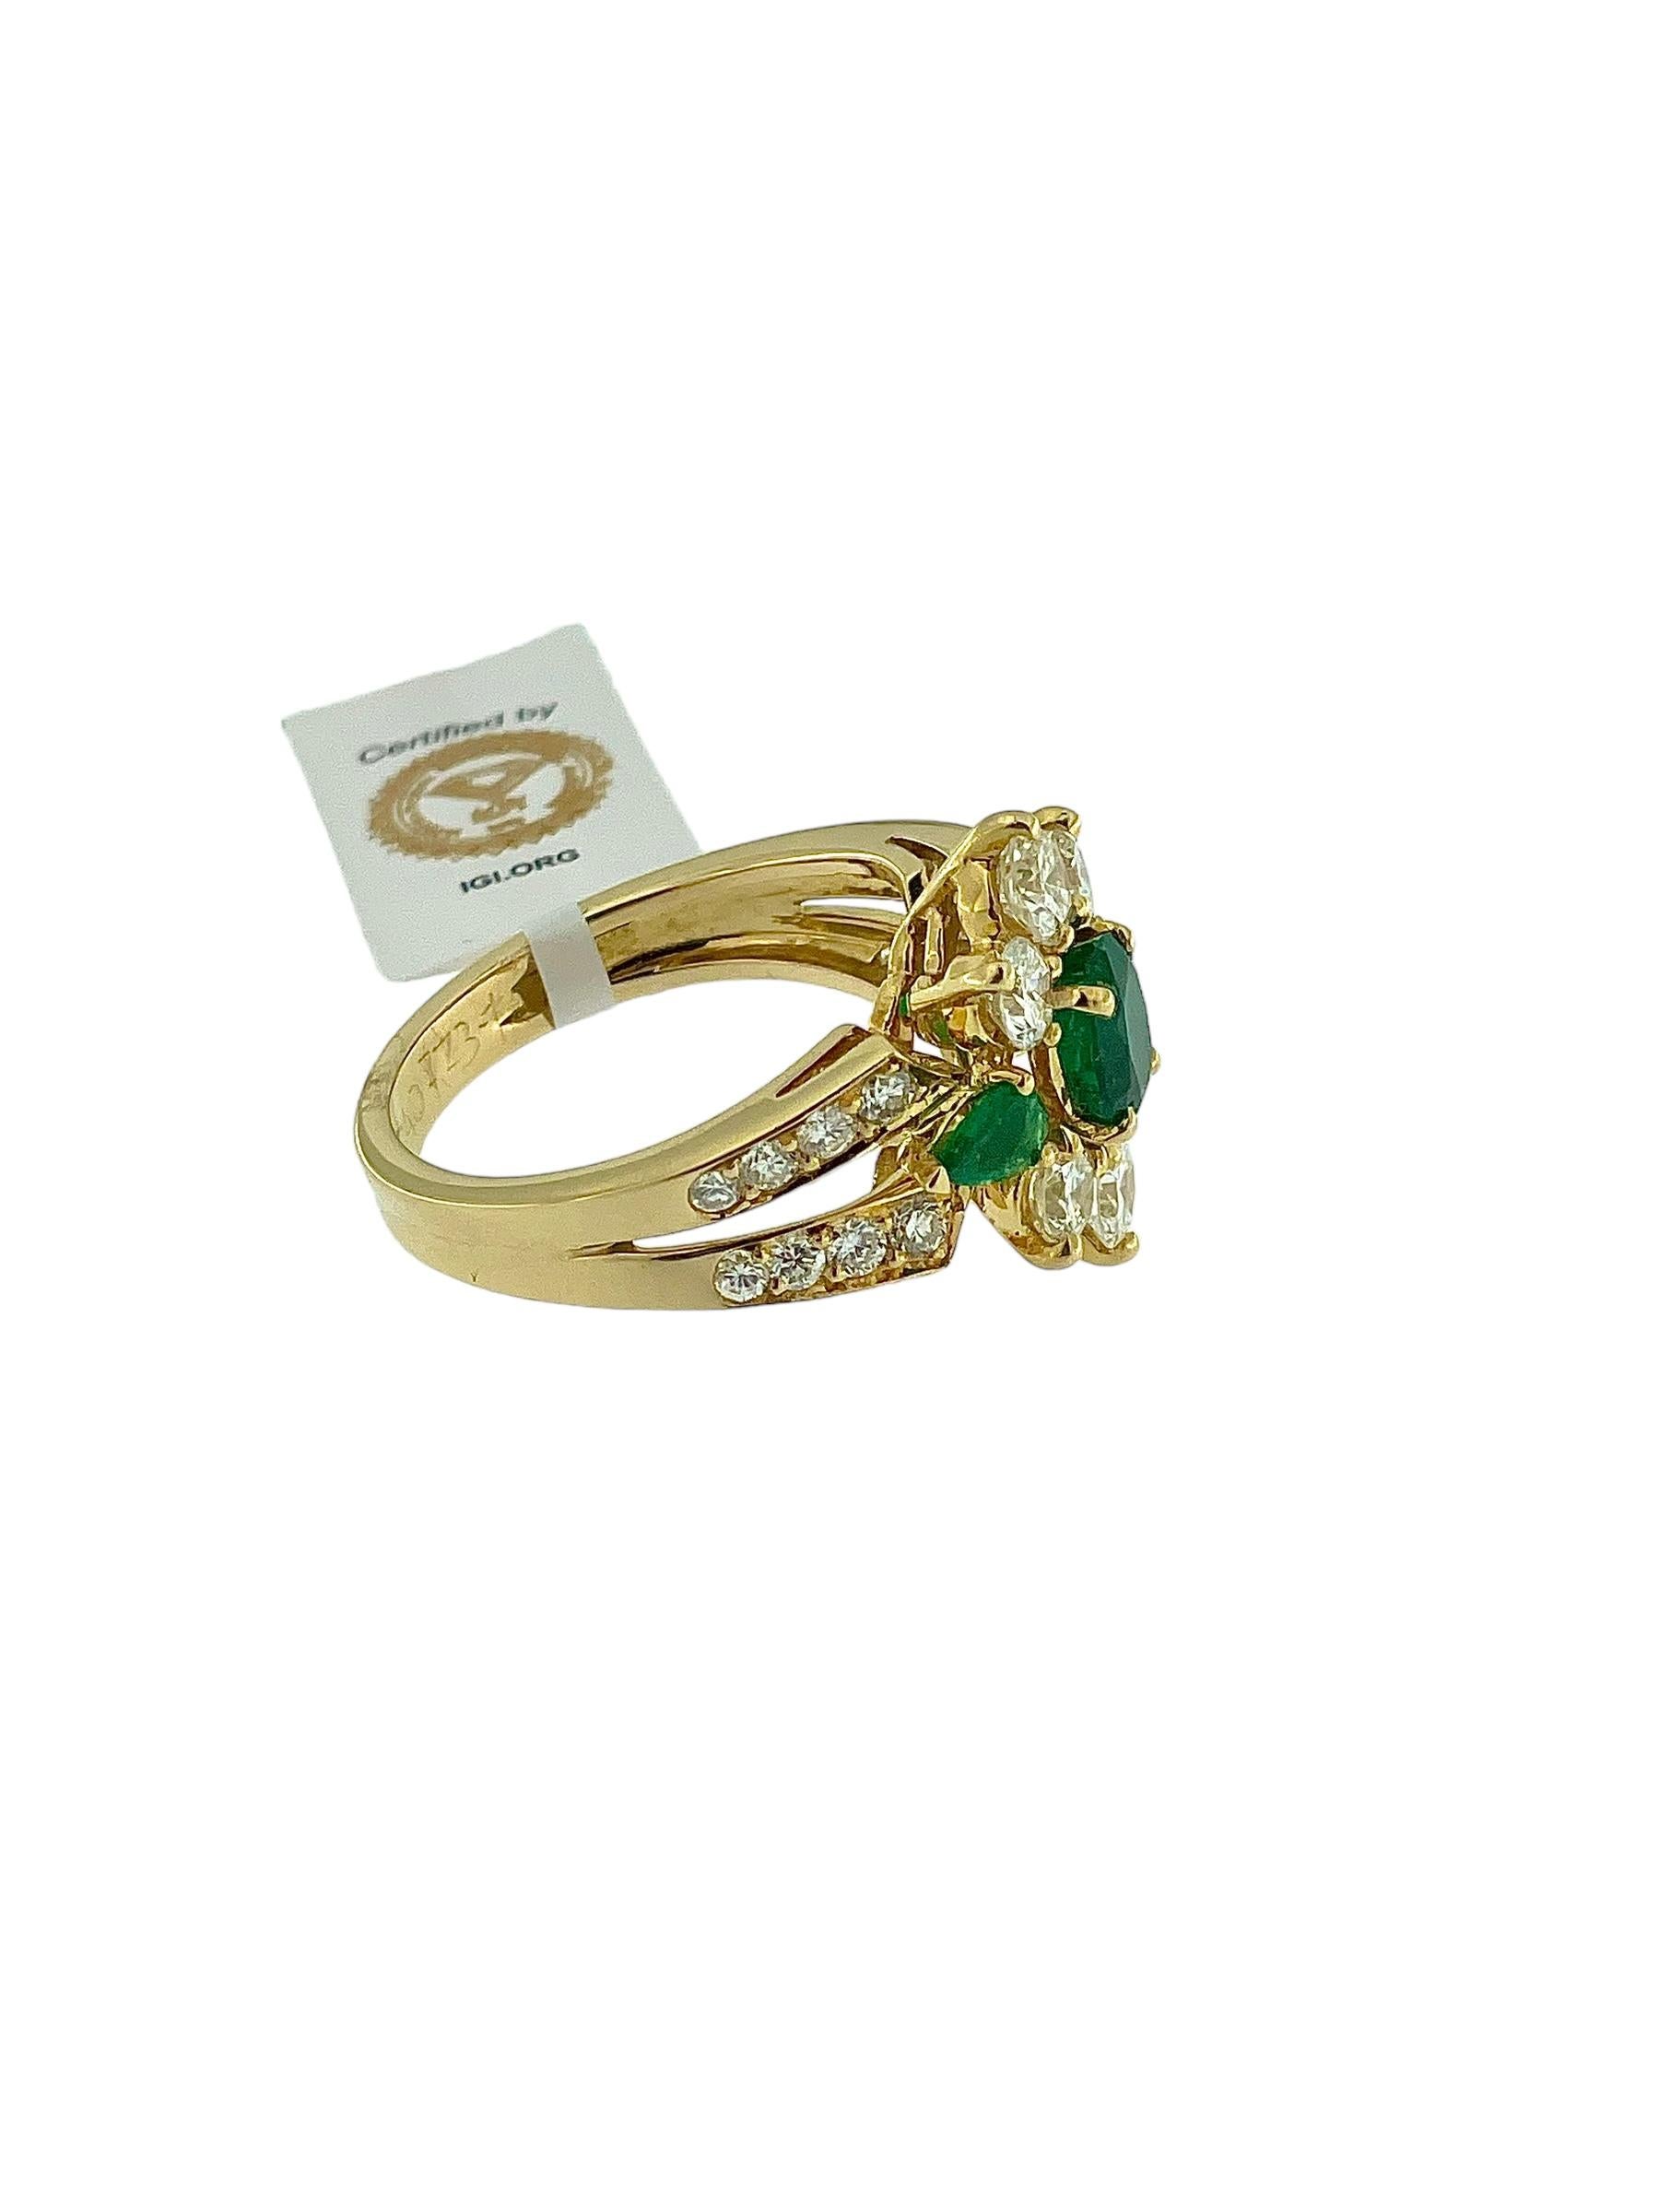 Retro Yellow Gold French Cocktail Ring with Emeralds and Diamonds IGI Certified In Good Condition For Sale In Esch sur Alzette, Esch-sur-Alzette